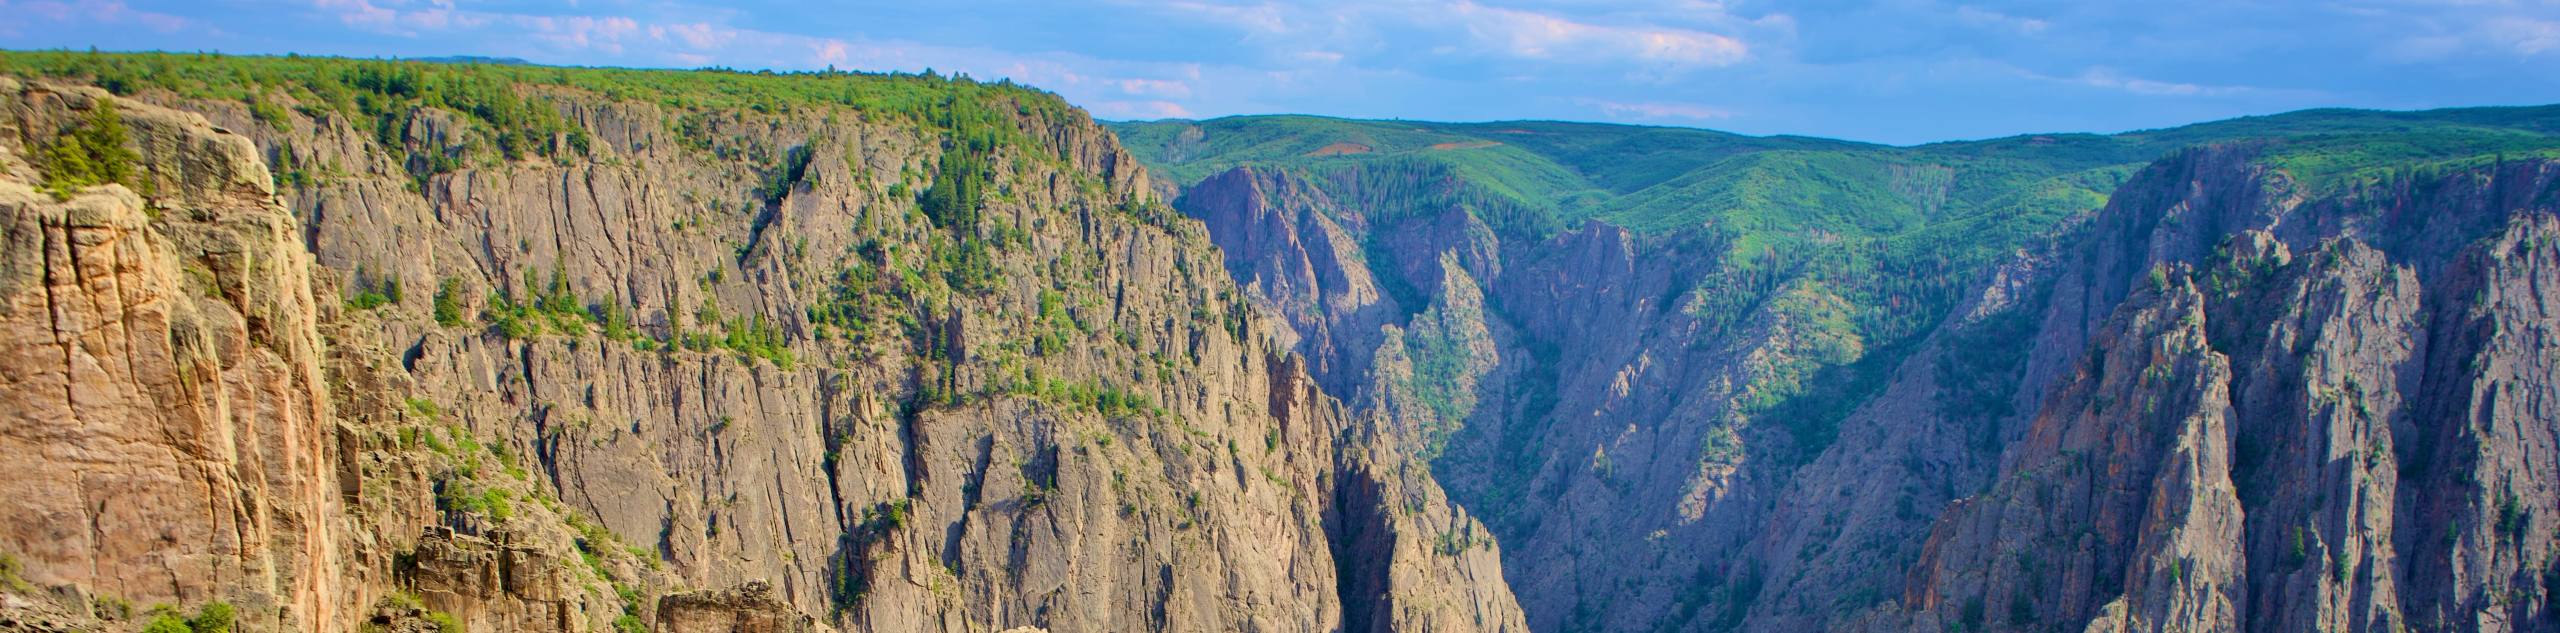 Black Canyon of the Gunnison National Park Hiking